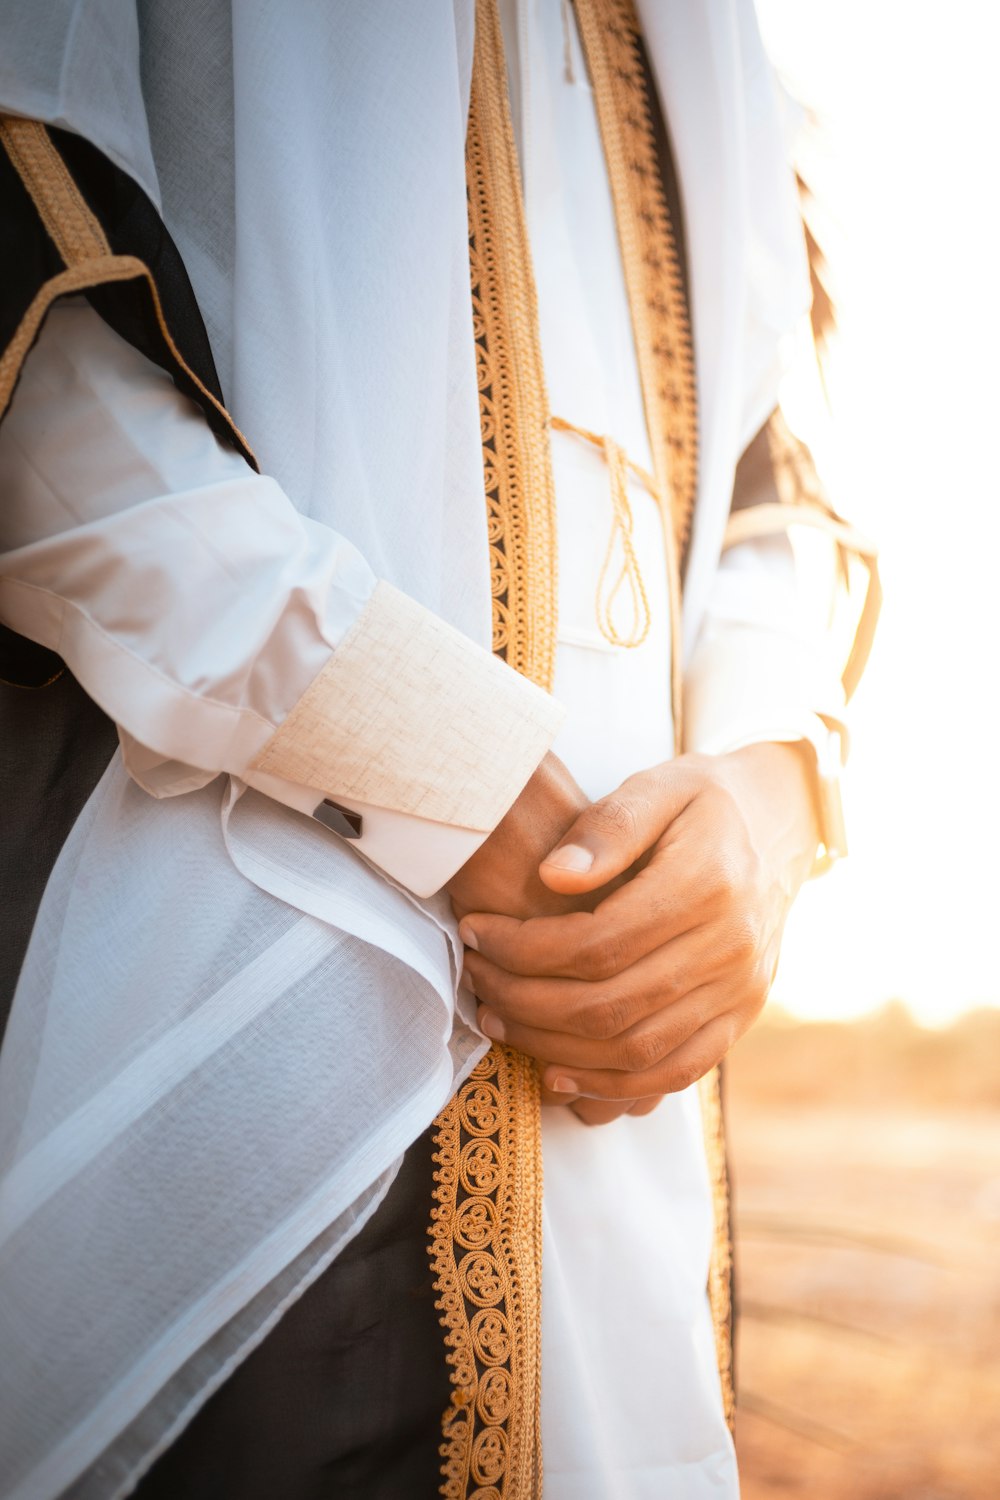 a close up of a person wearing a priest's robe